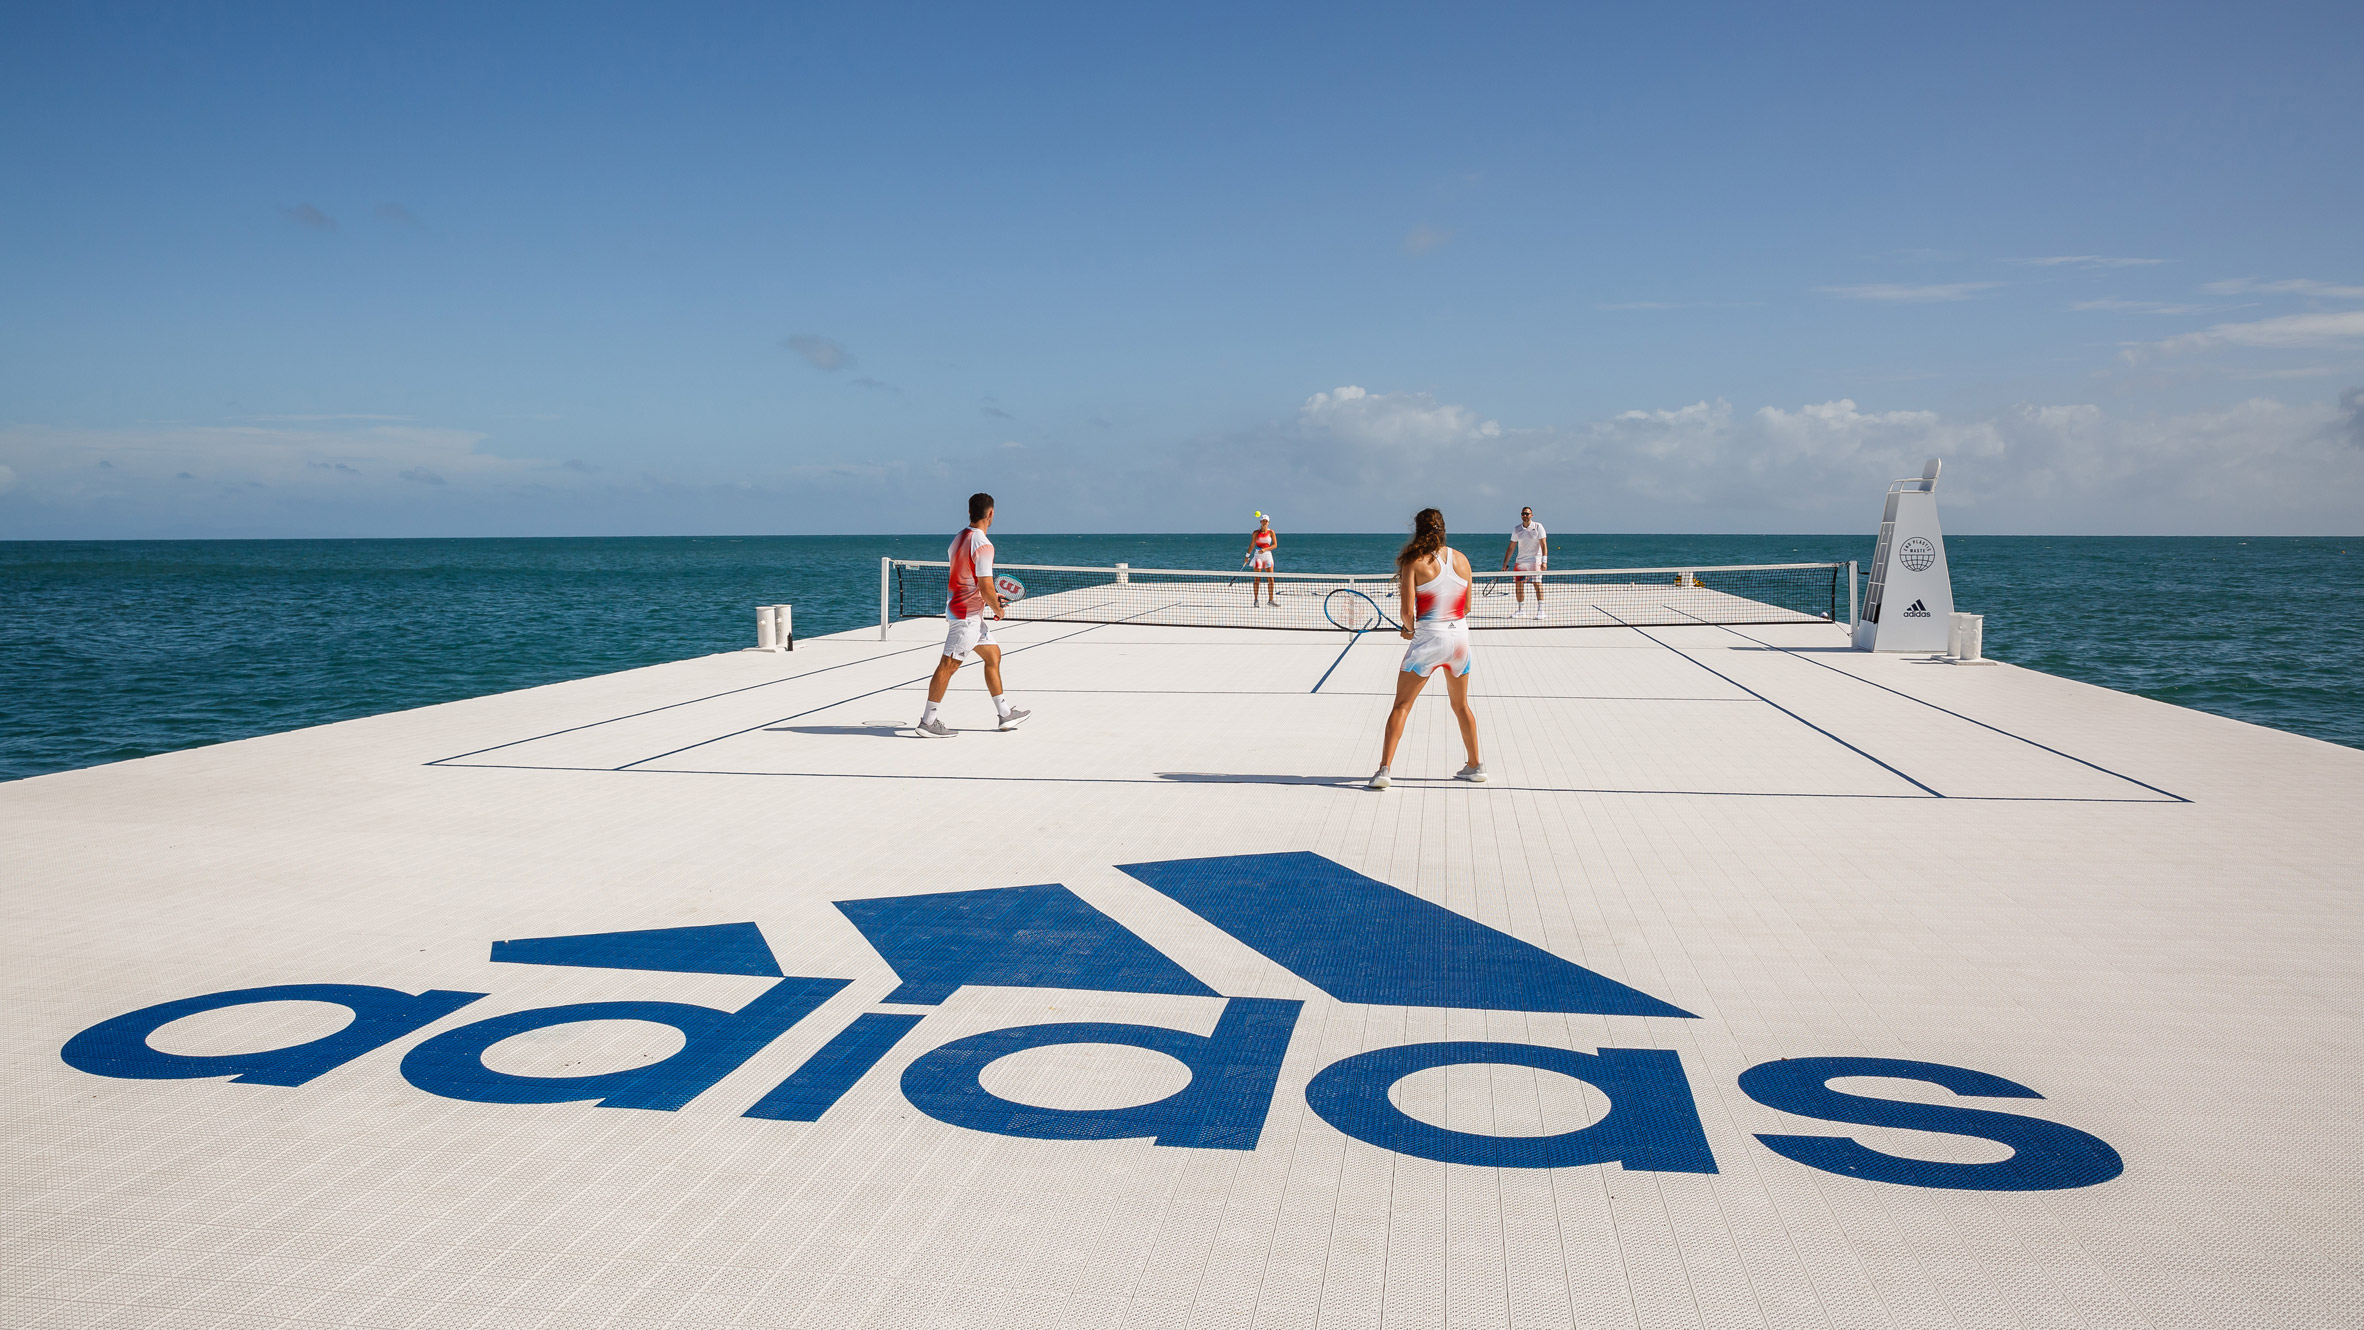 Adidas launches floating tennis court in Great Barrier Reef